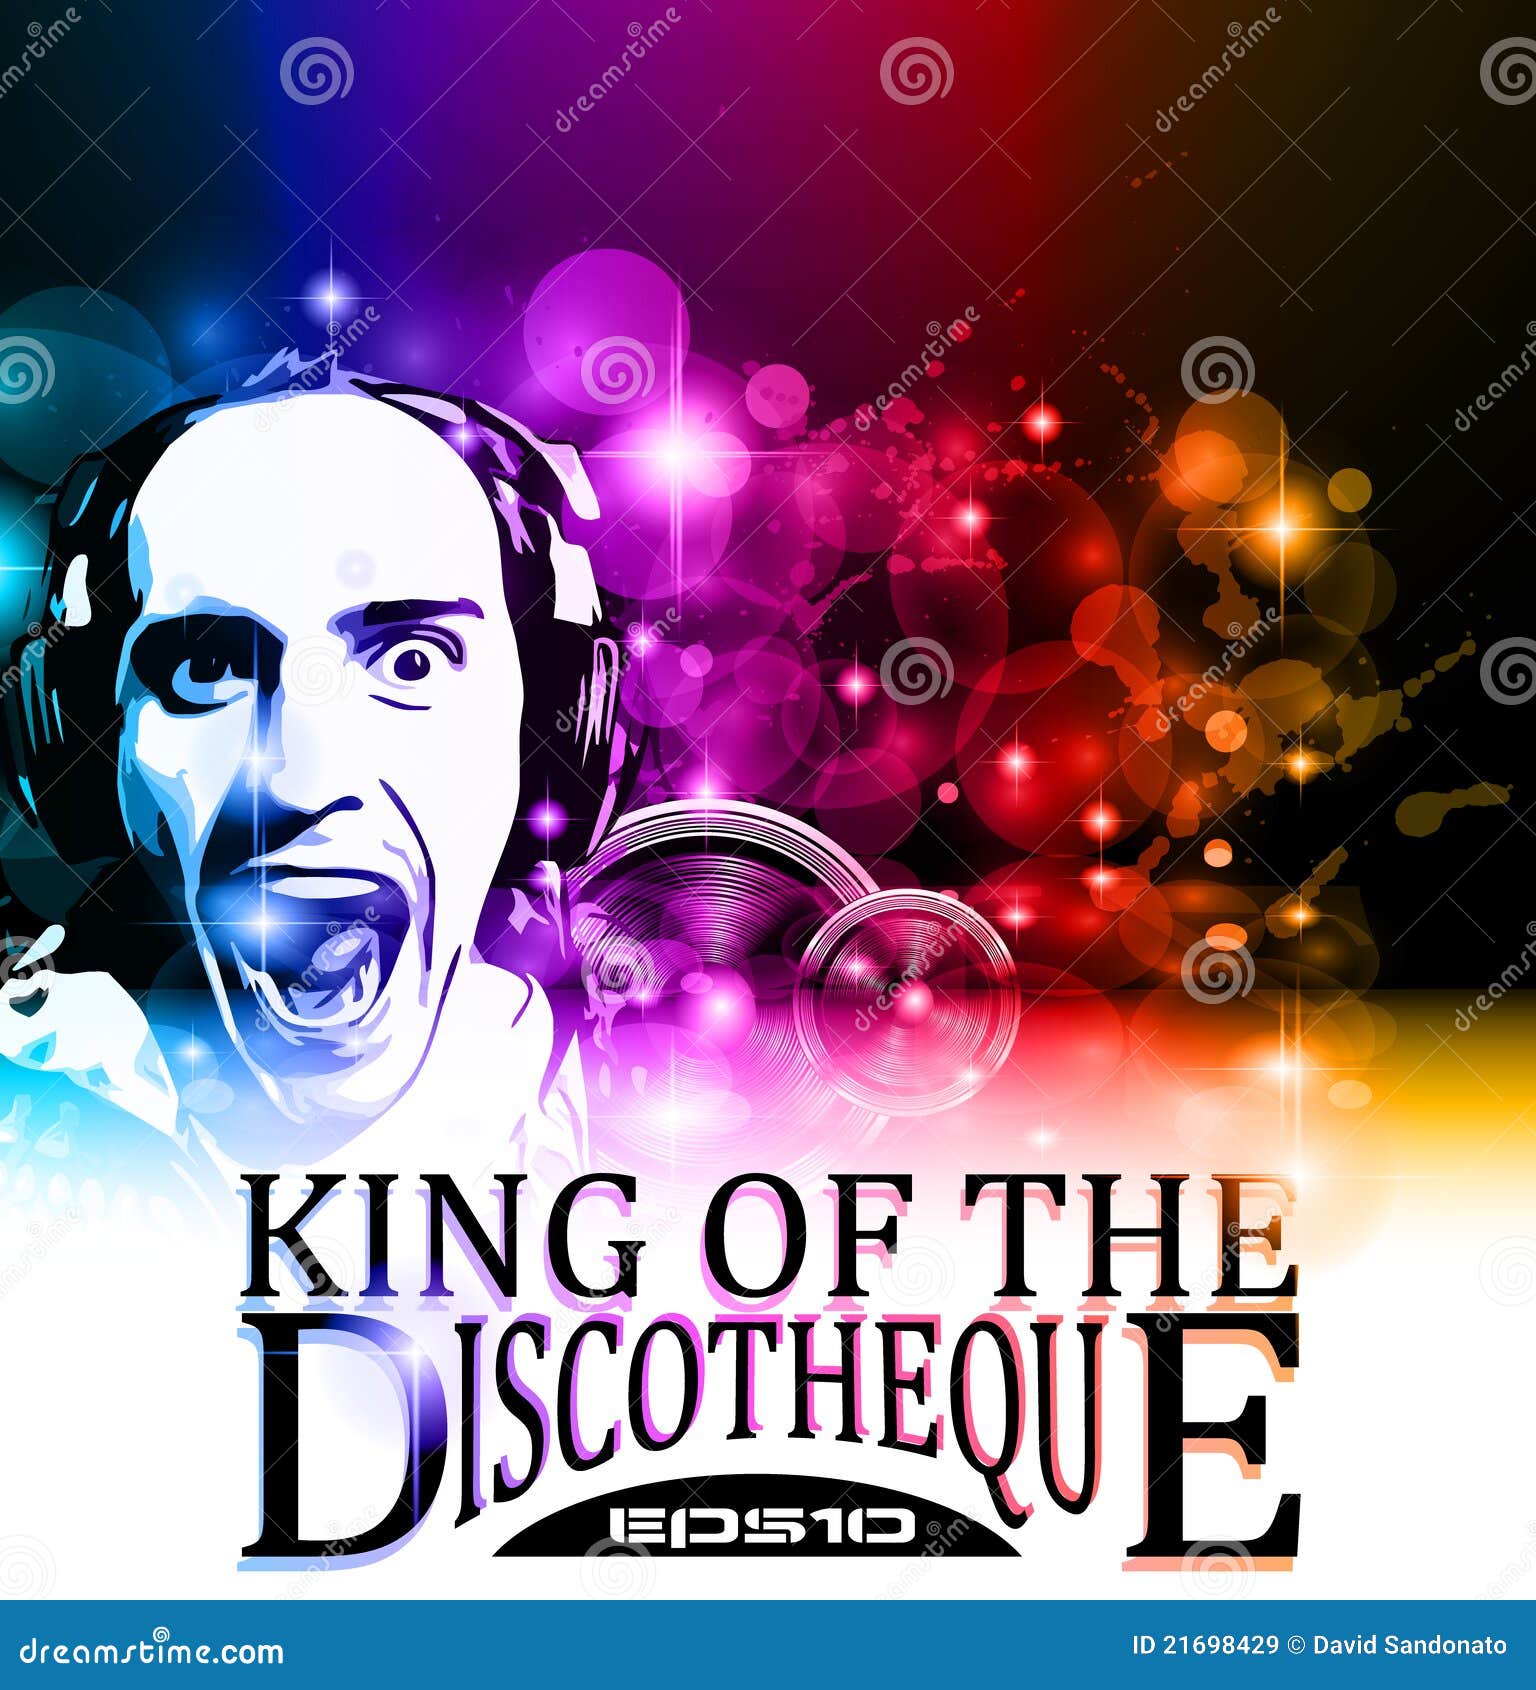 king of the discotheque flyer